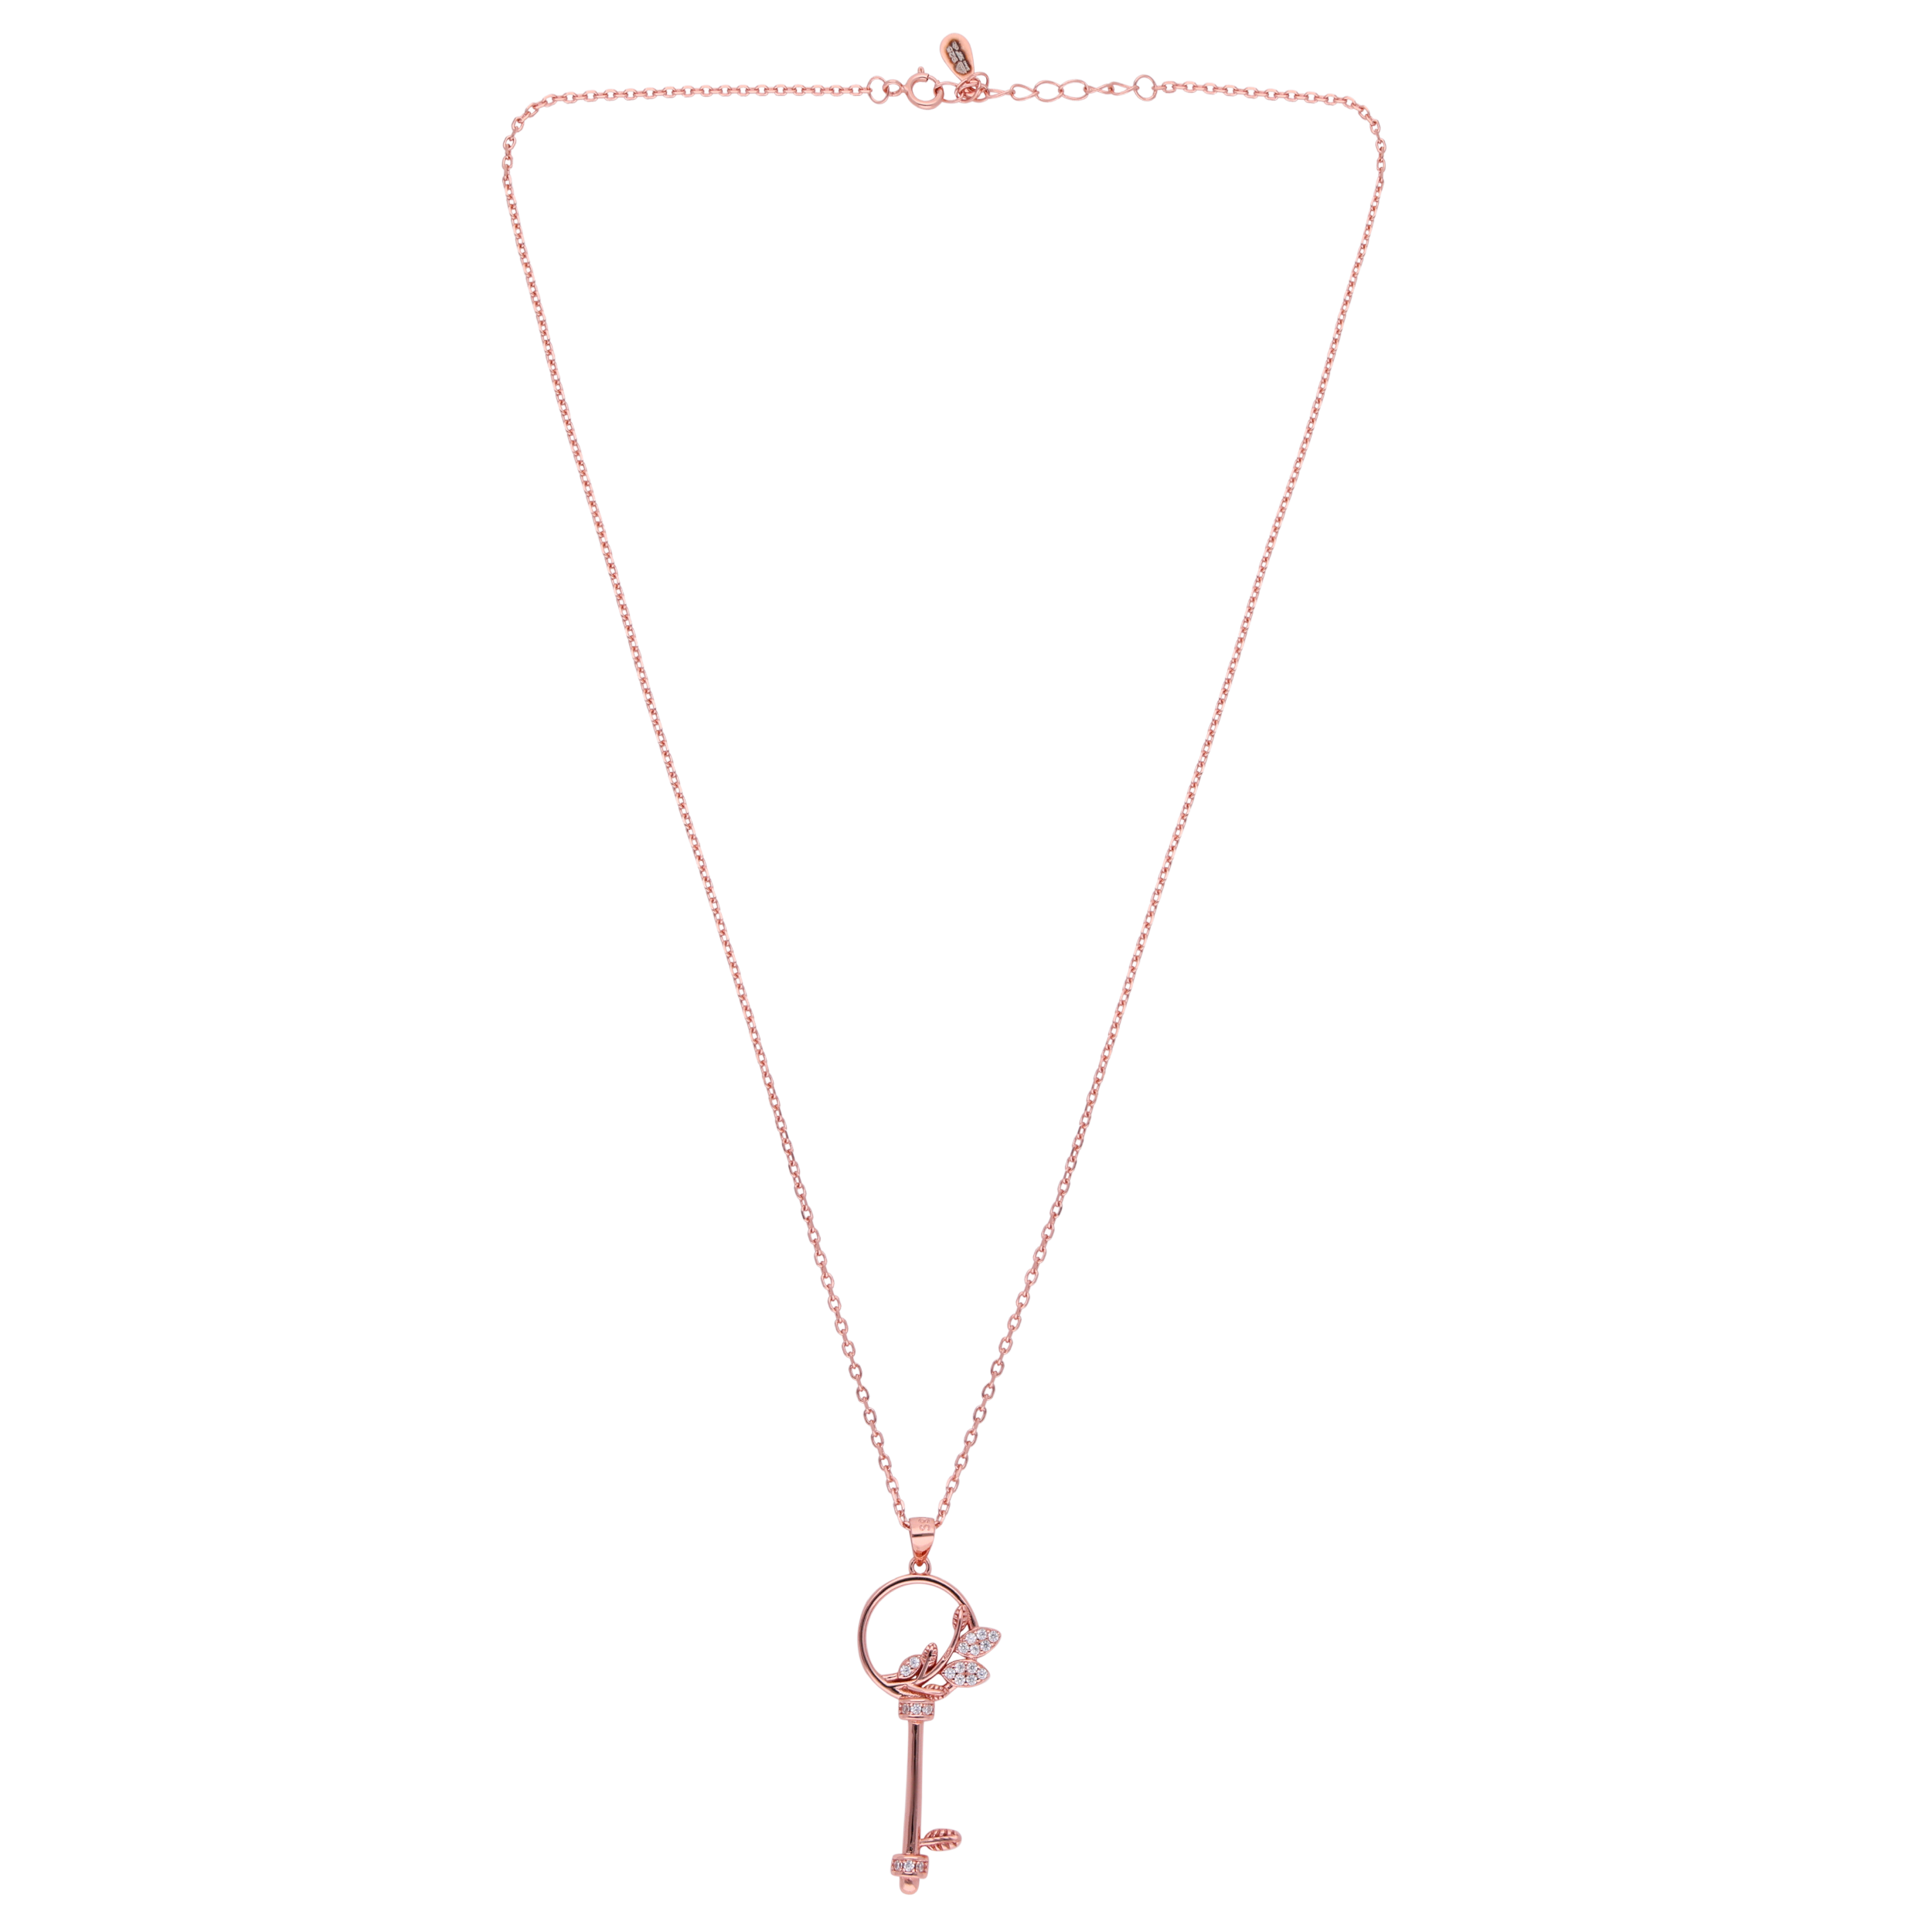 Mystery and Grace: Sterling Silver Key Pendant Chain | SKU : 0019281698, 0019272368